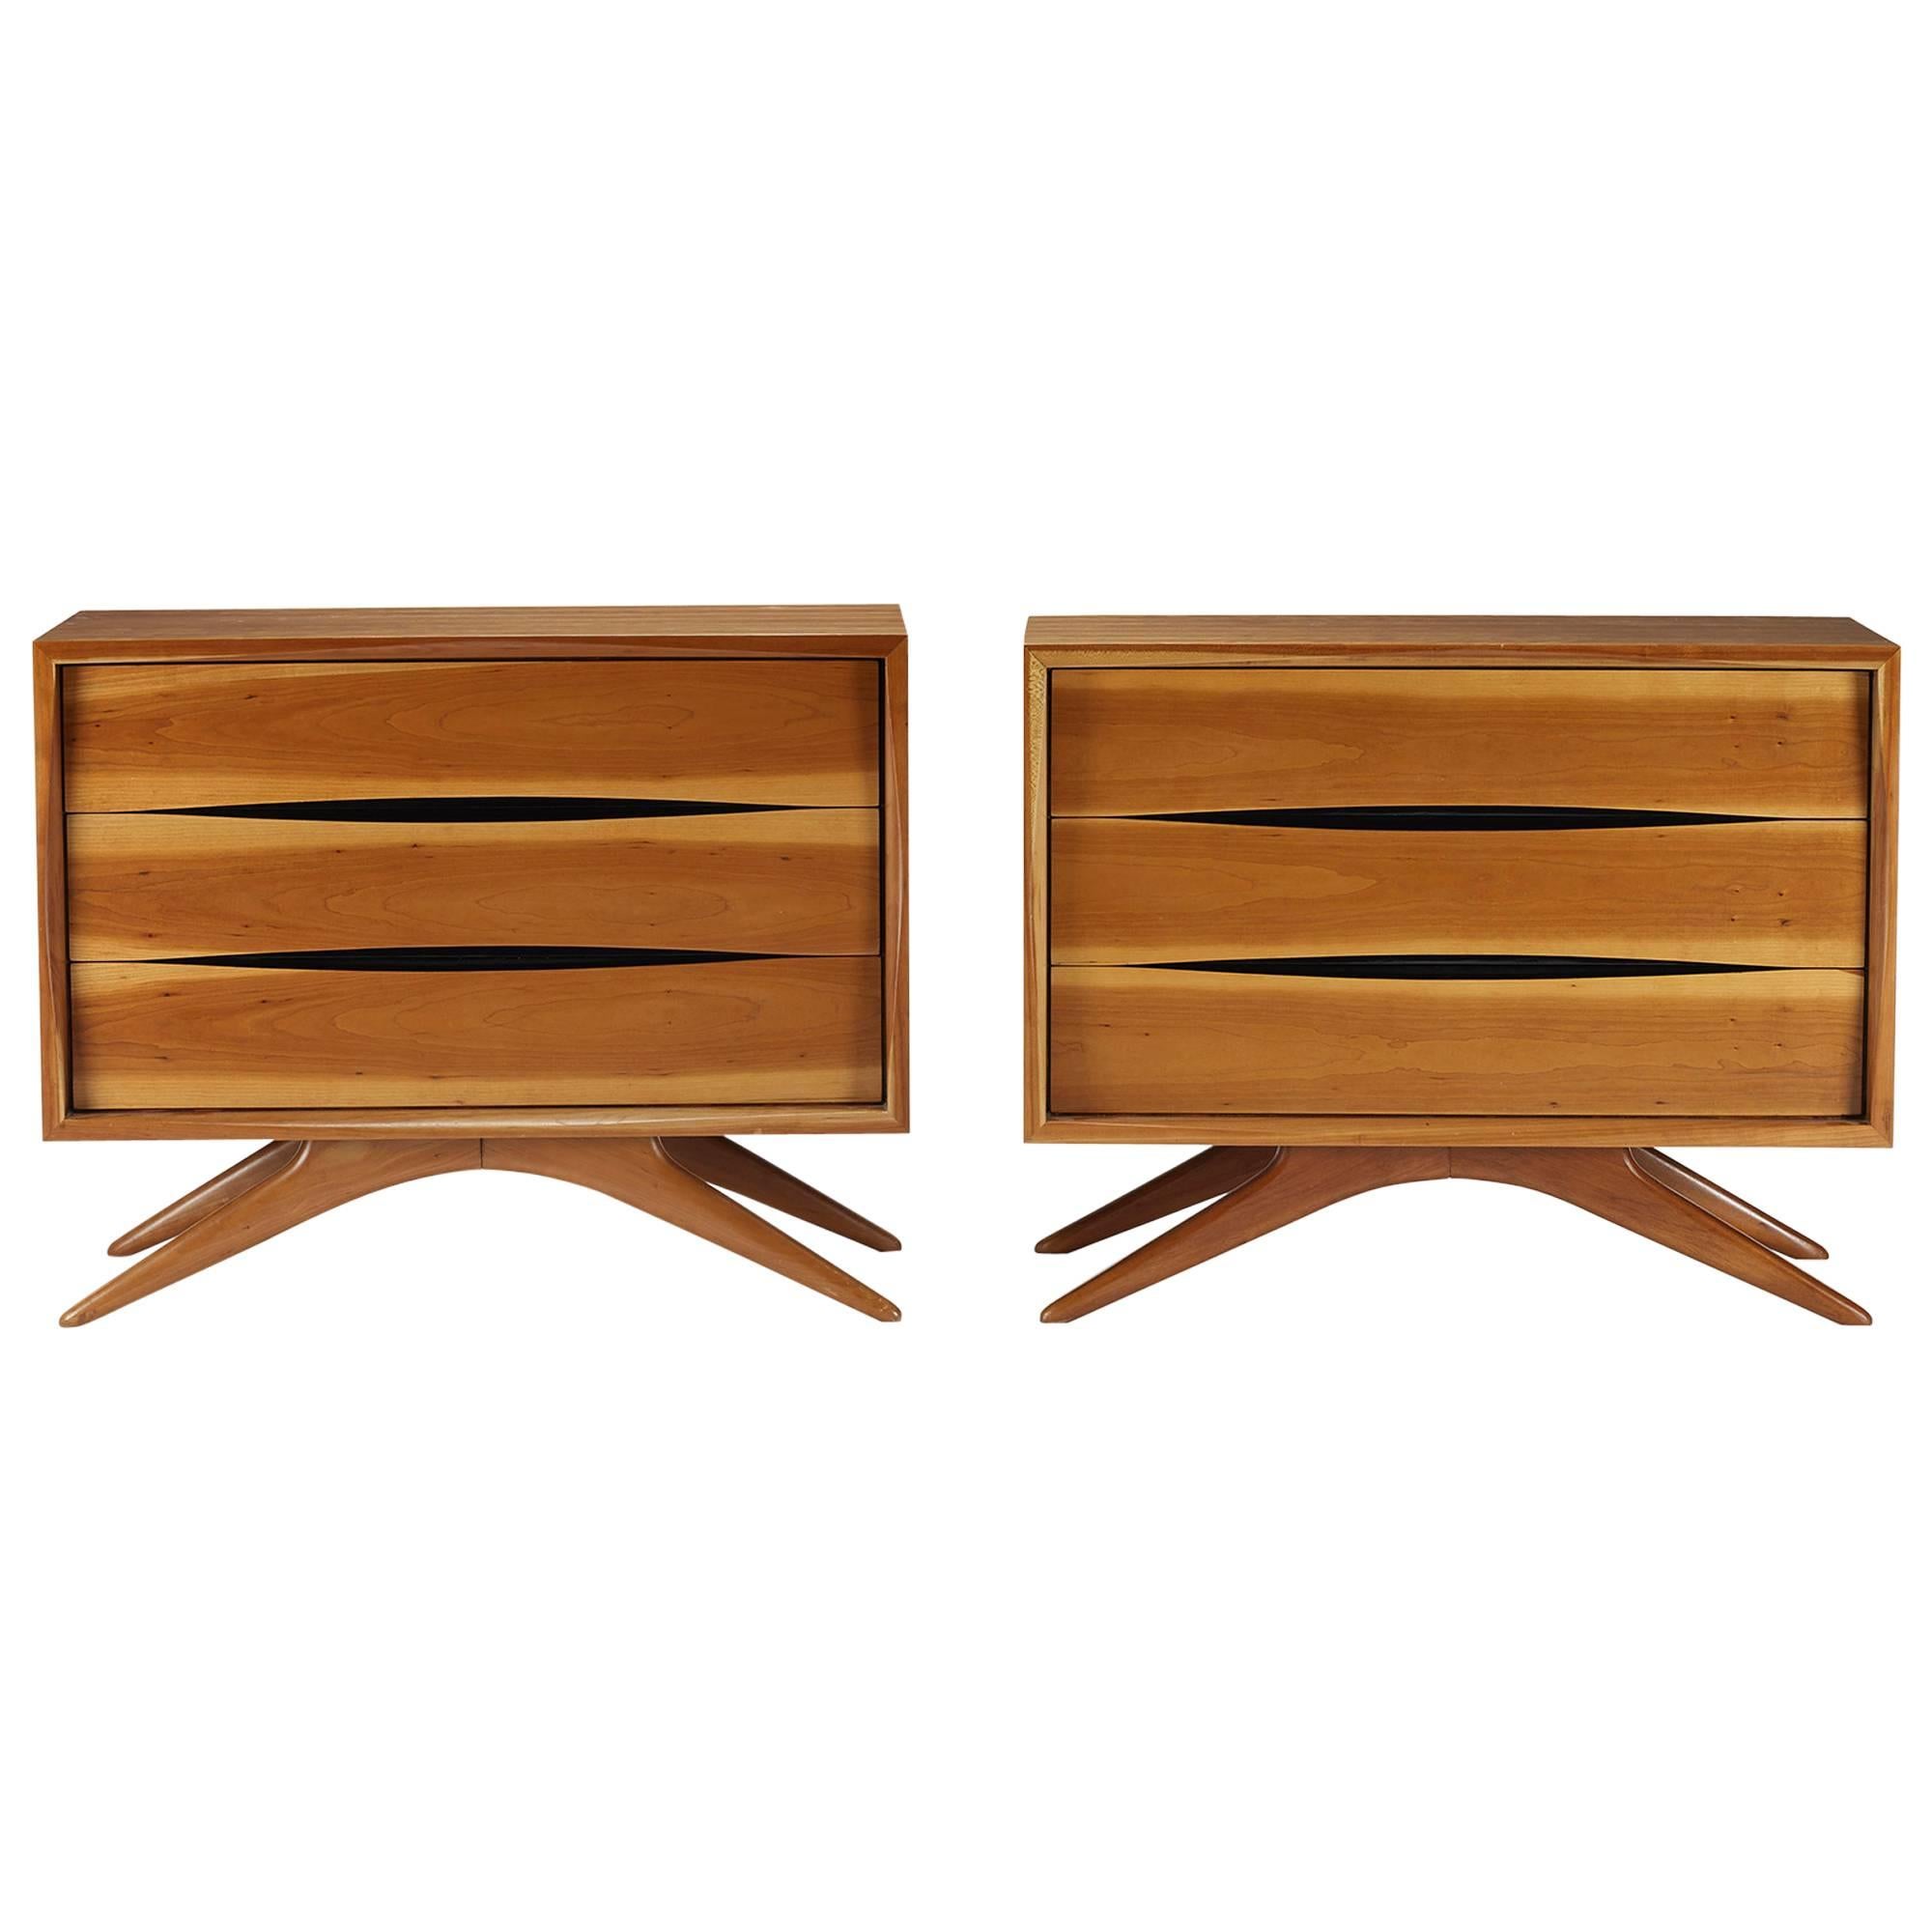 Chests, Pair by Vladimir Kagan for Grosfeld House